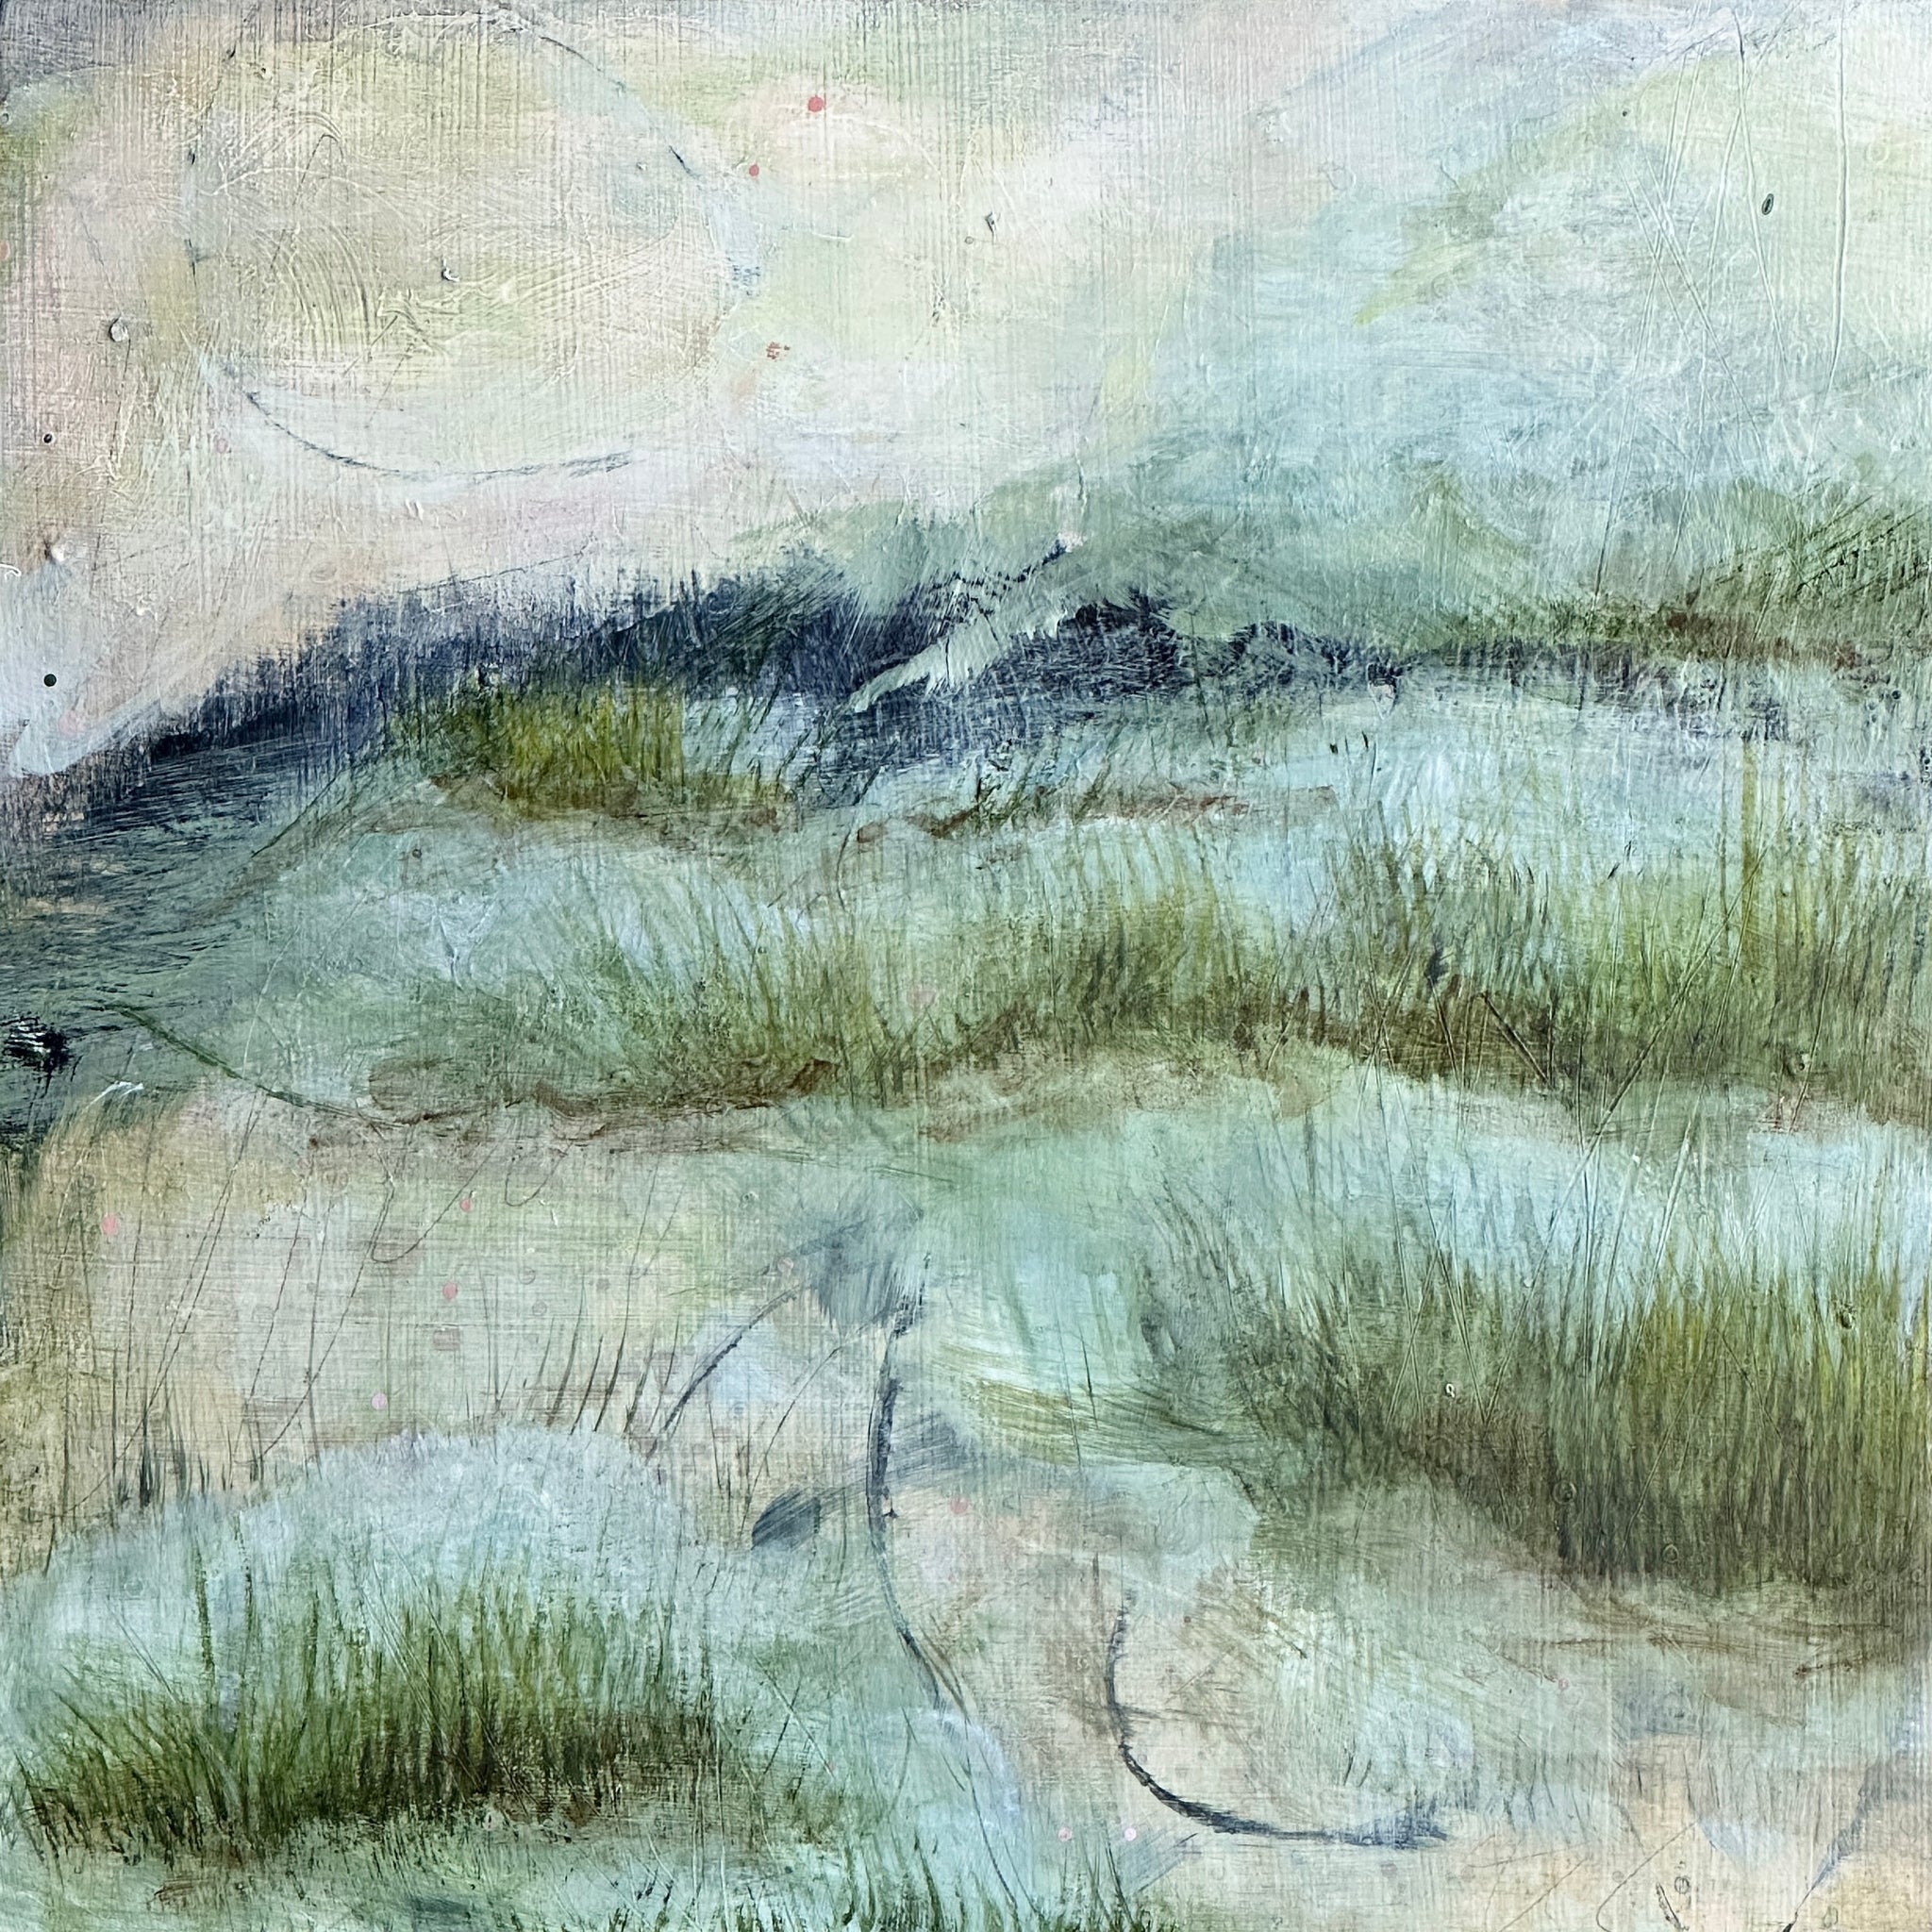 8 x 8 x 1.5-inch impression of marshes fading away into the sea.  Acrylic painting on cradled panel with natural wood frame.  By Cumming, GA artist, Juanita Bellavance. Part of our 25 Days of Minis 2022 collection.  Collect them all!